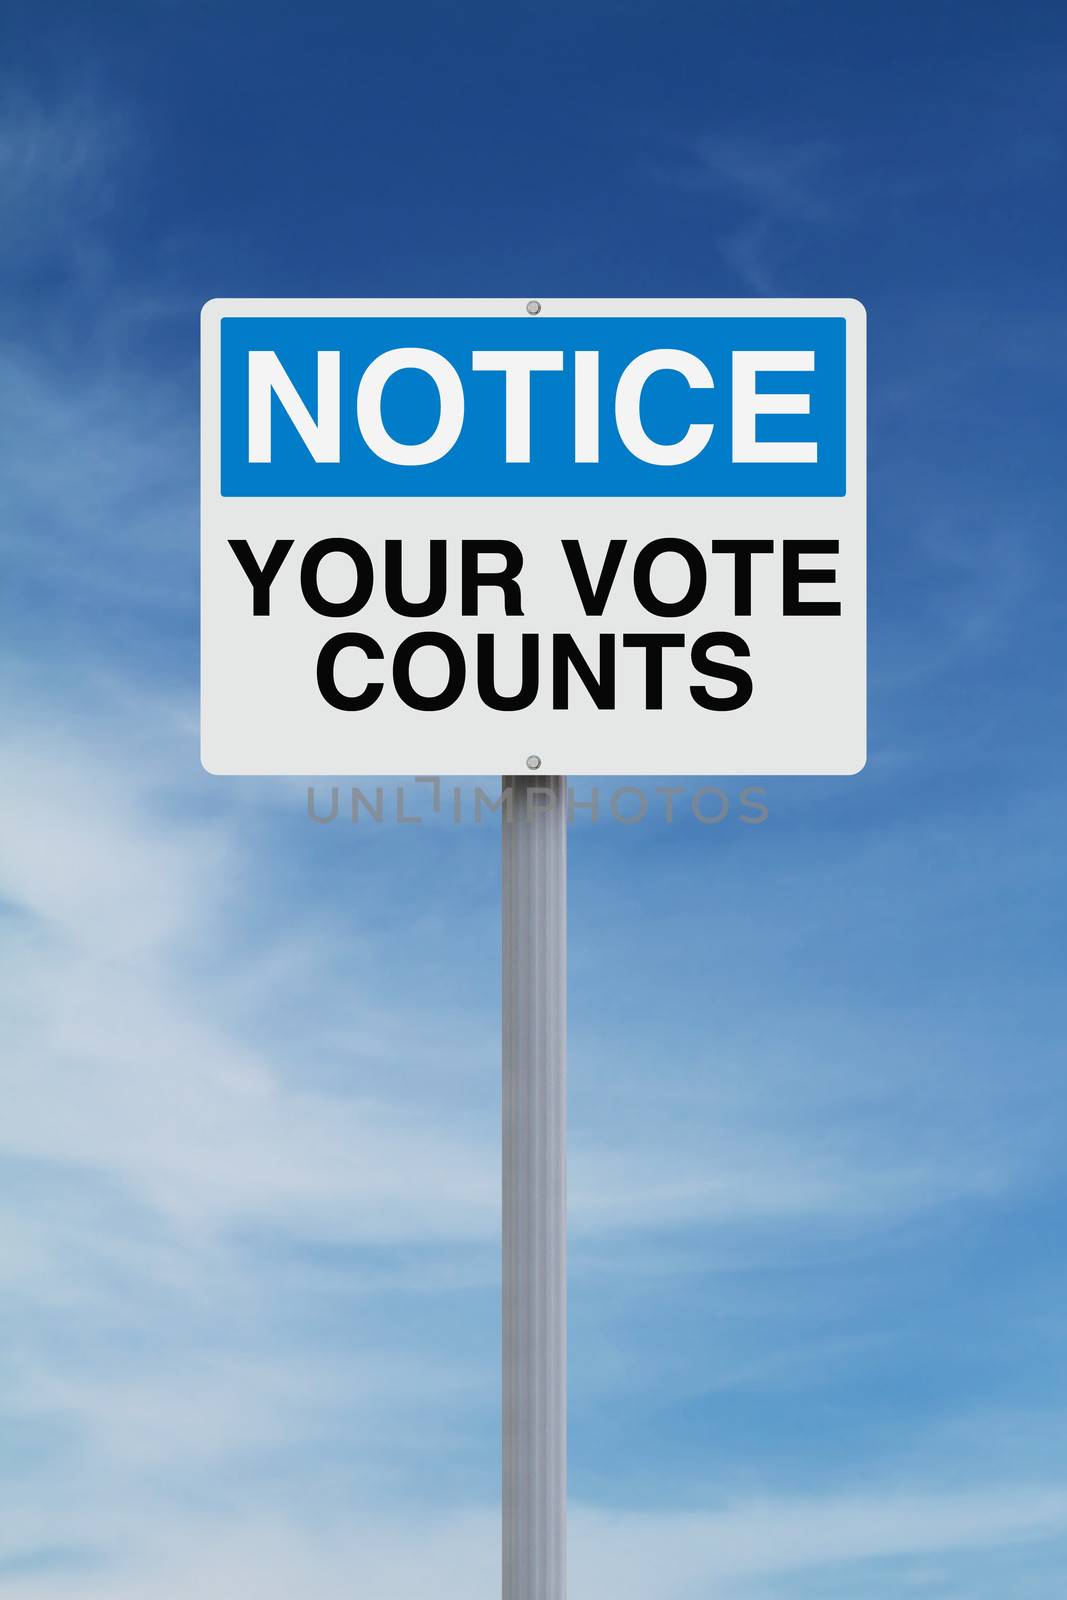 Your Vote Counts by rnl